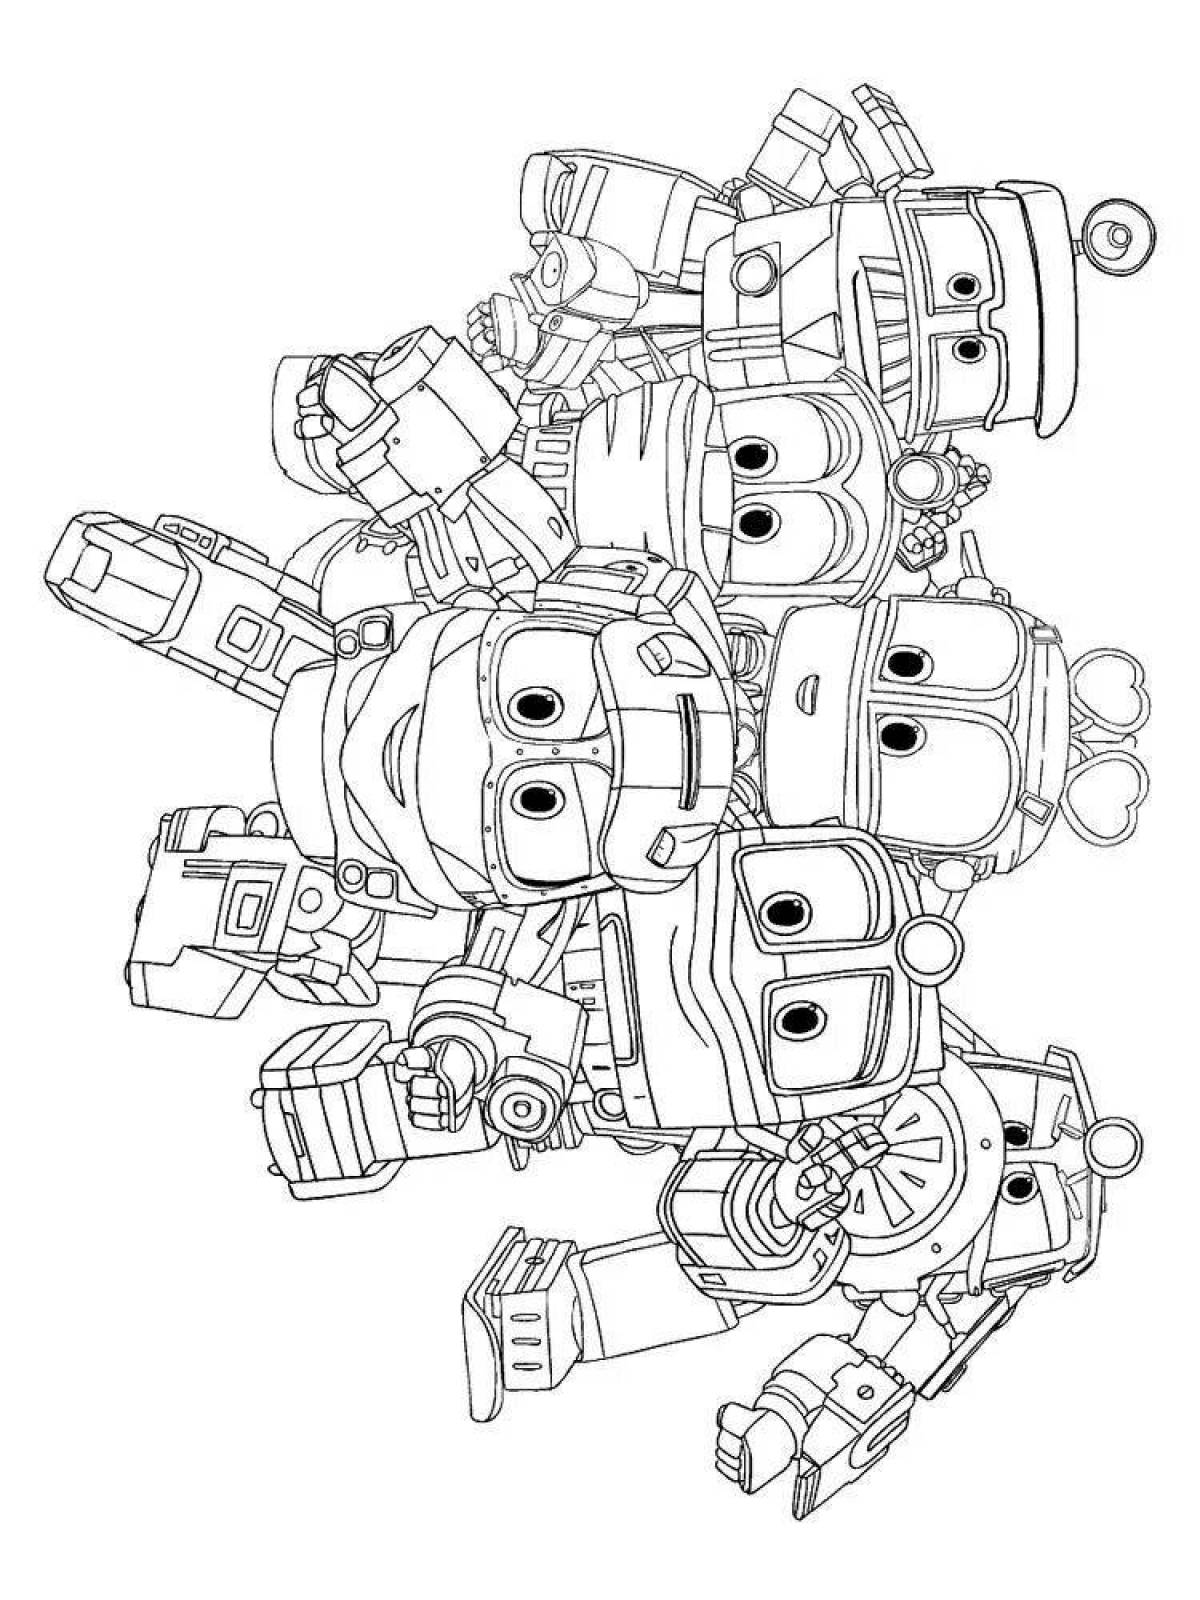 Duke's funny robot train coloring page